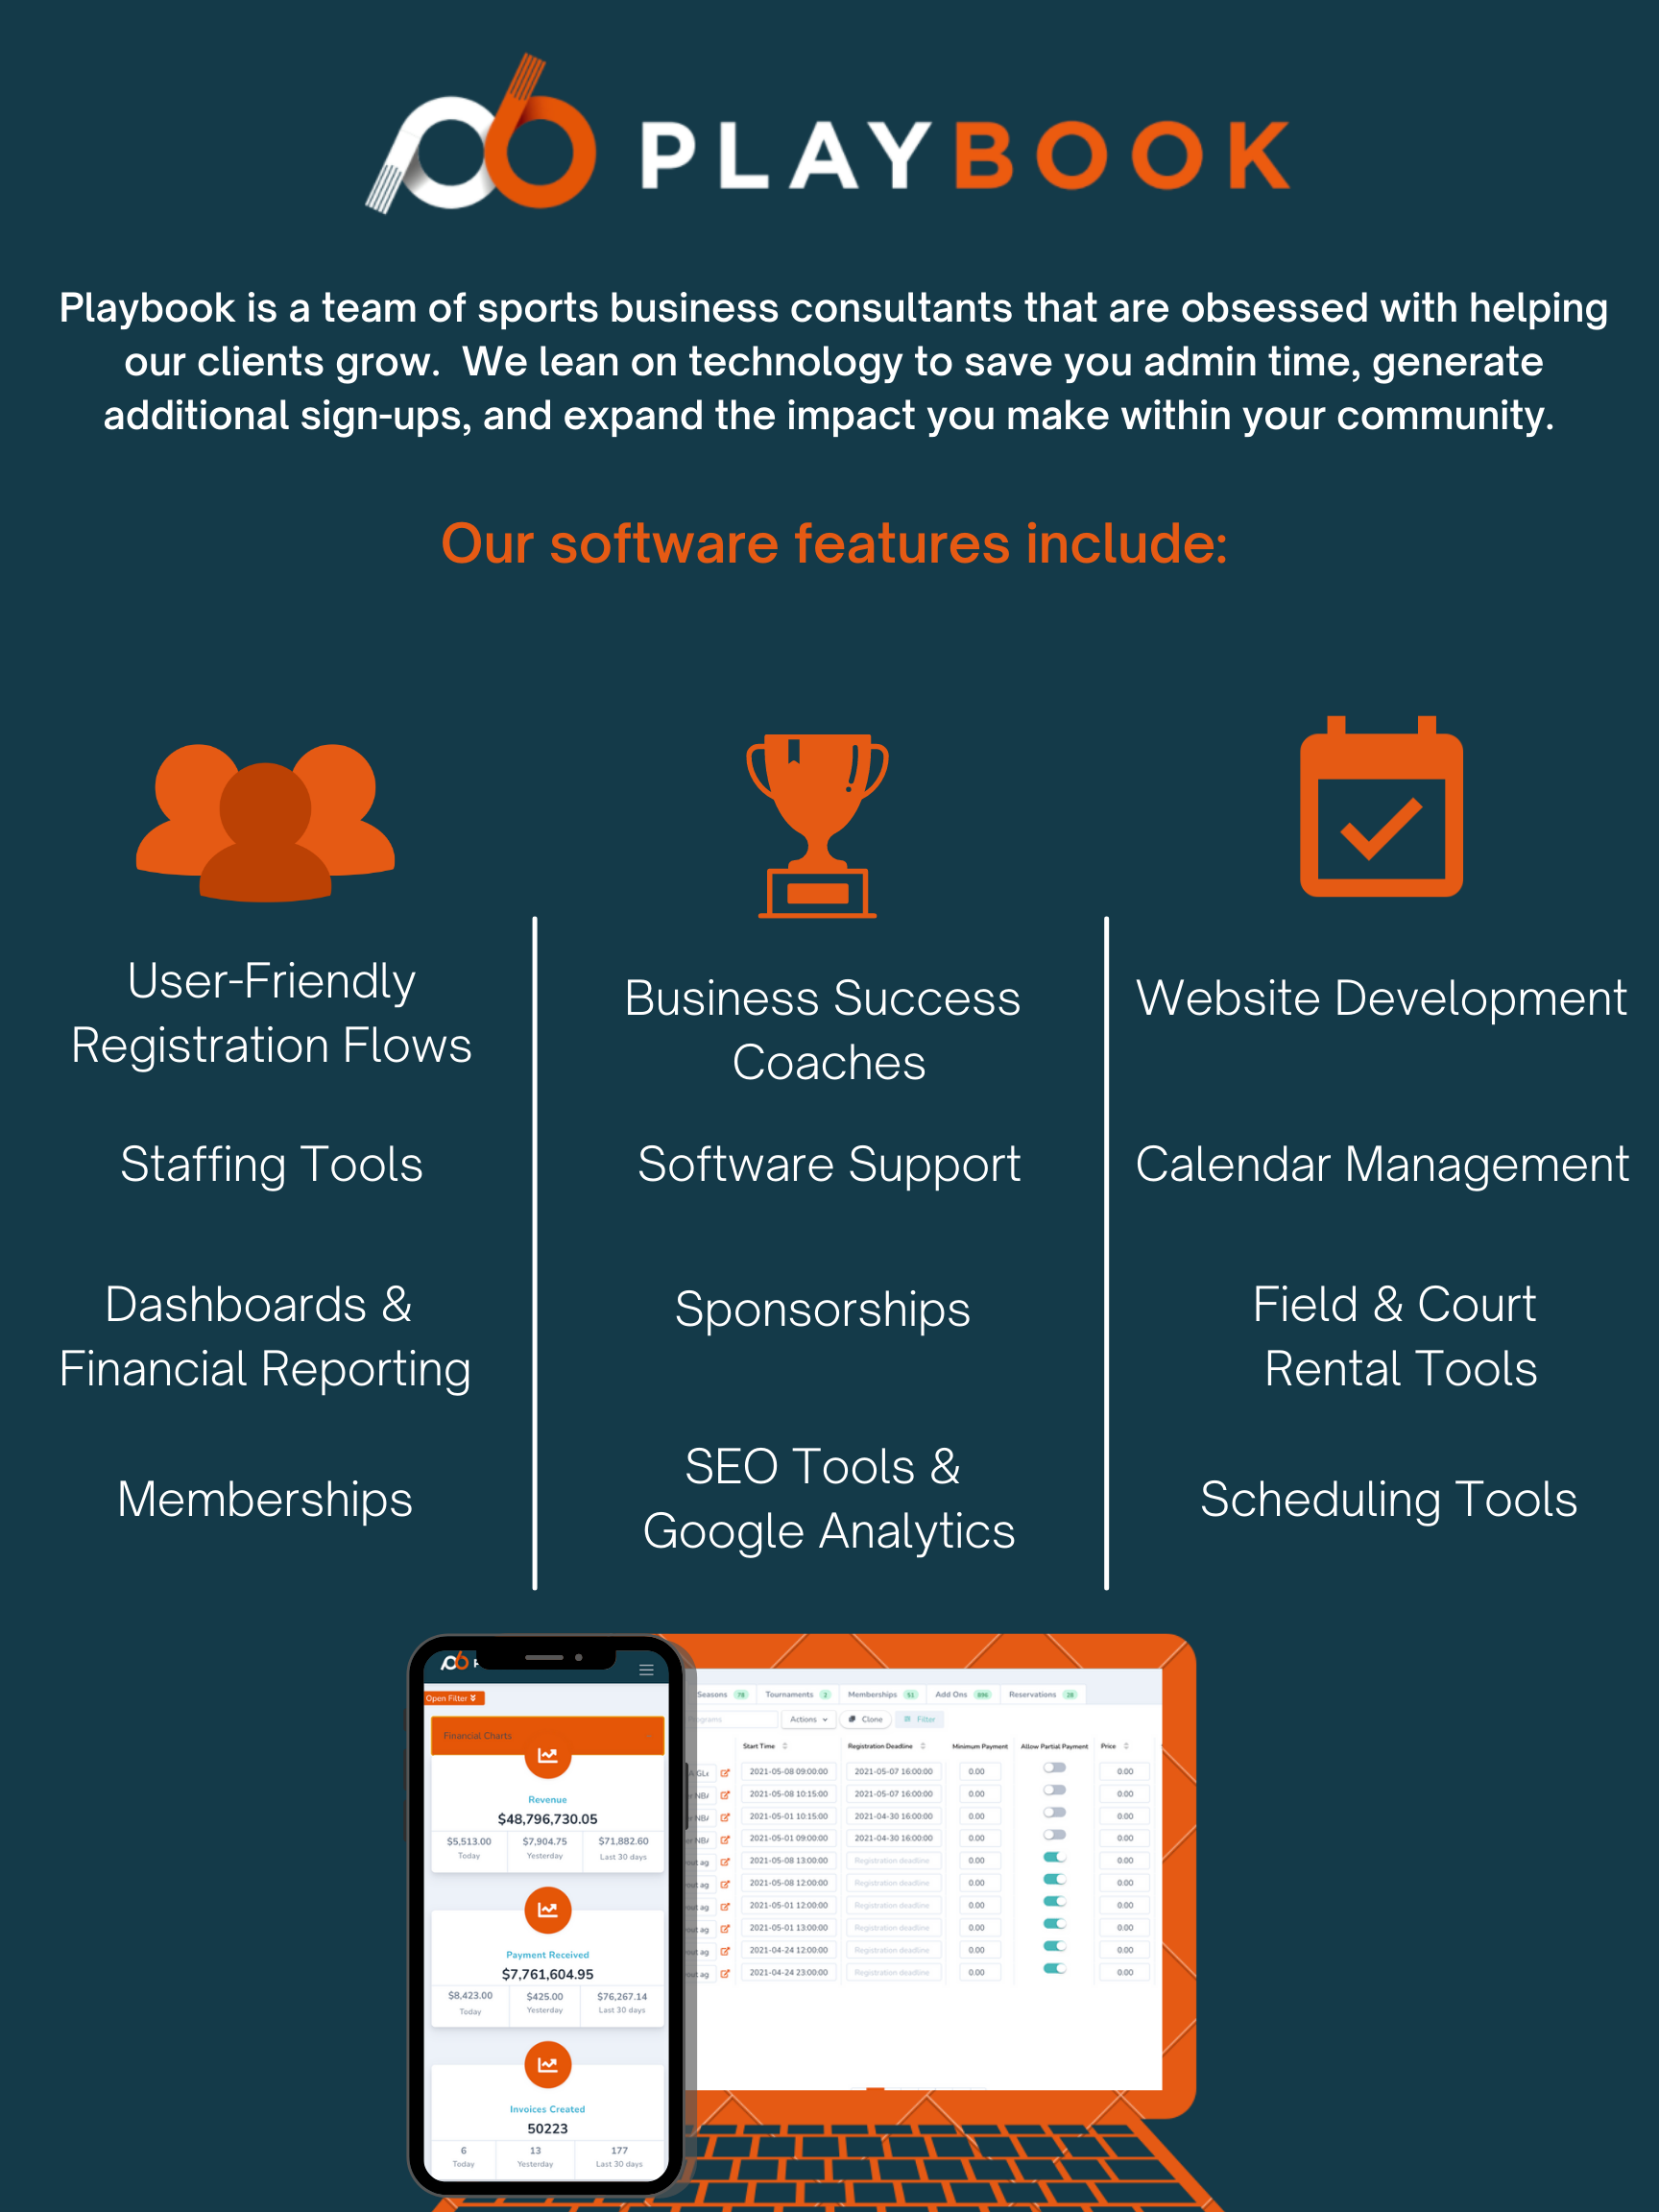 Here at Playbook, we are a business tool that assists sports organizations with the management of their programs in addition to expanding their reach within the community (2)